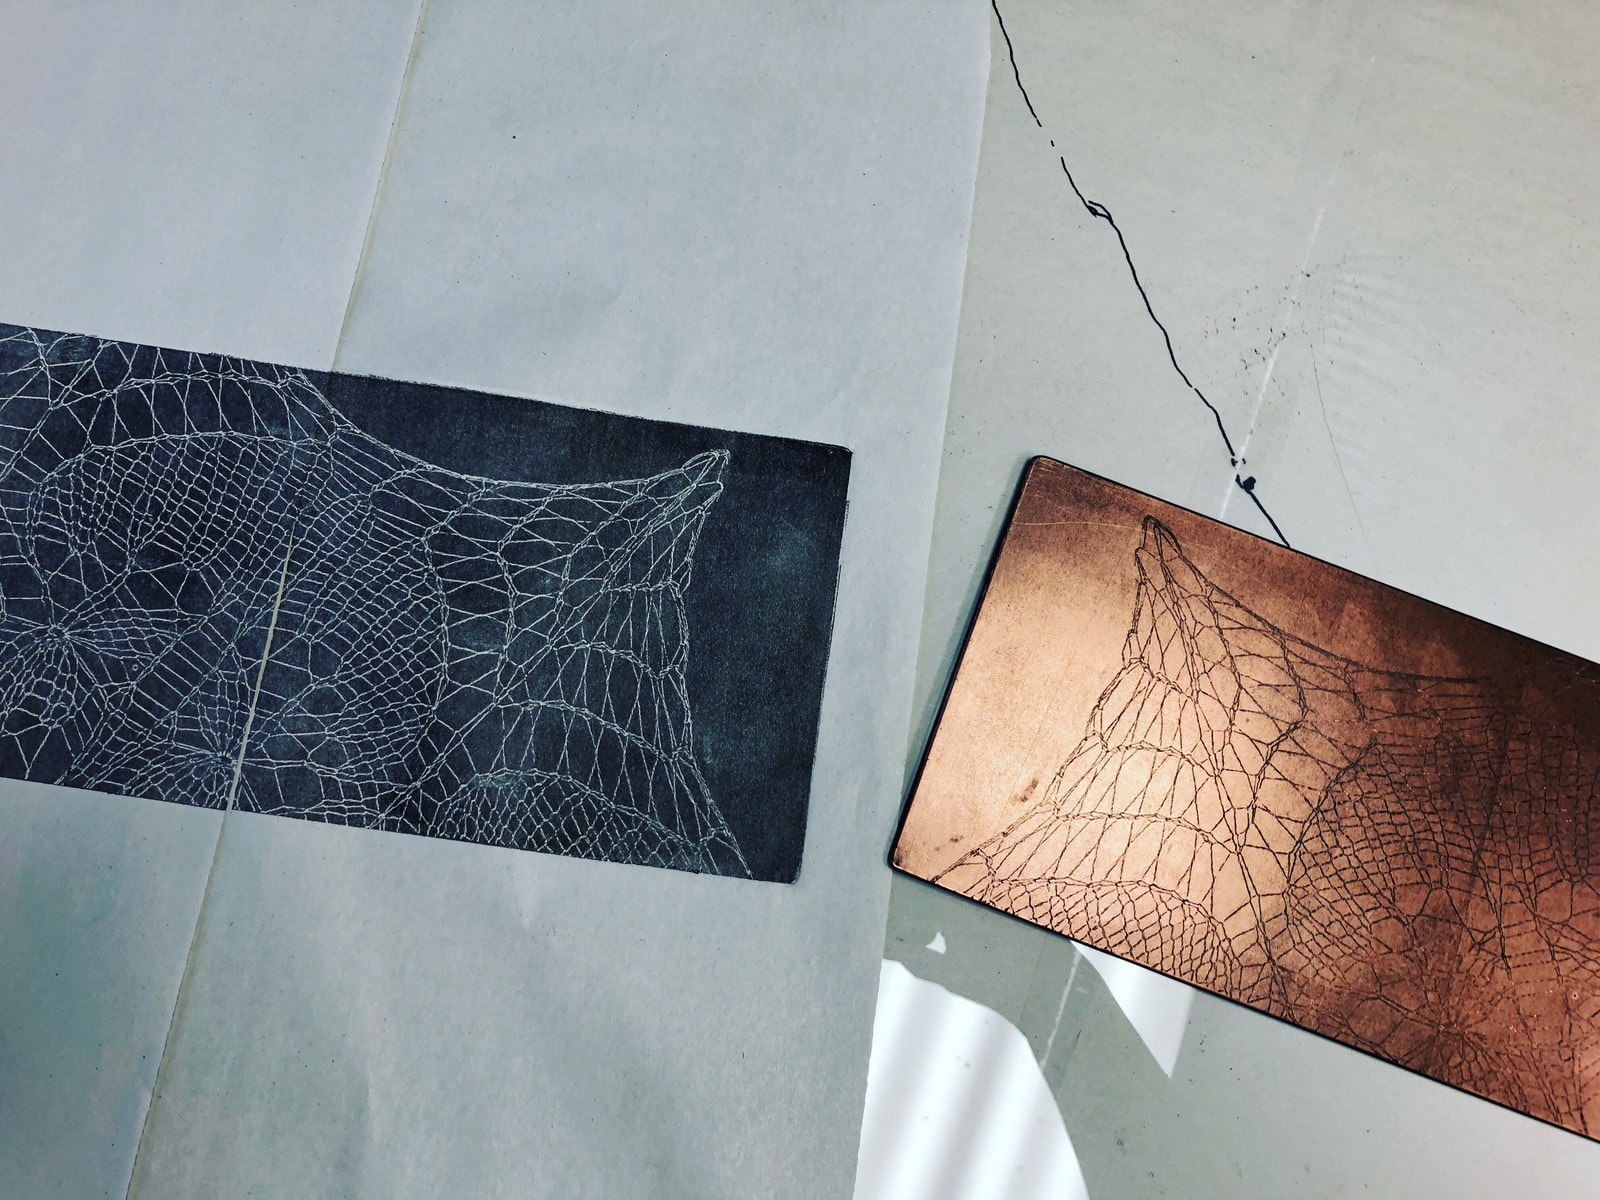 image: a copper etching of the shawl on the right, a test print on the left